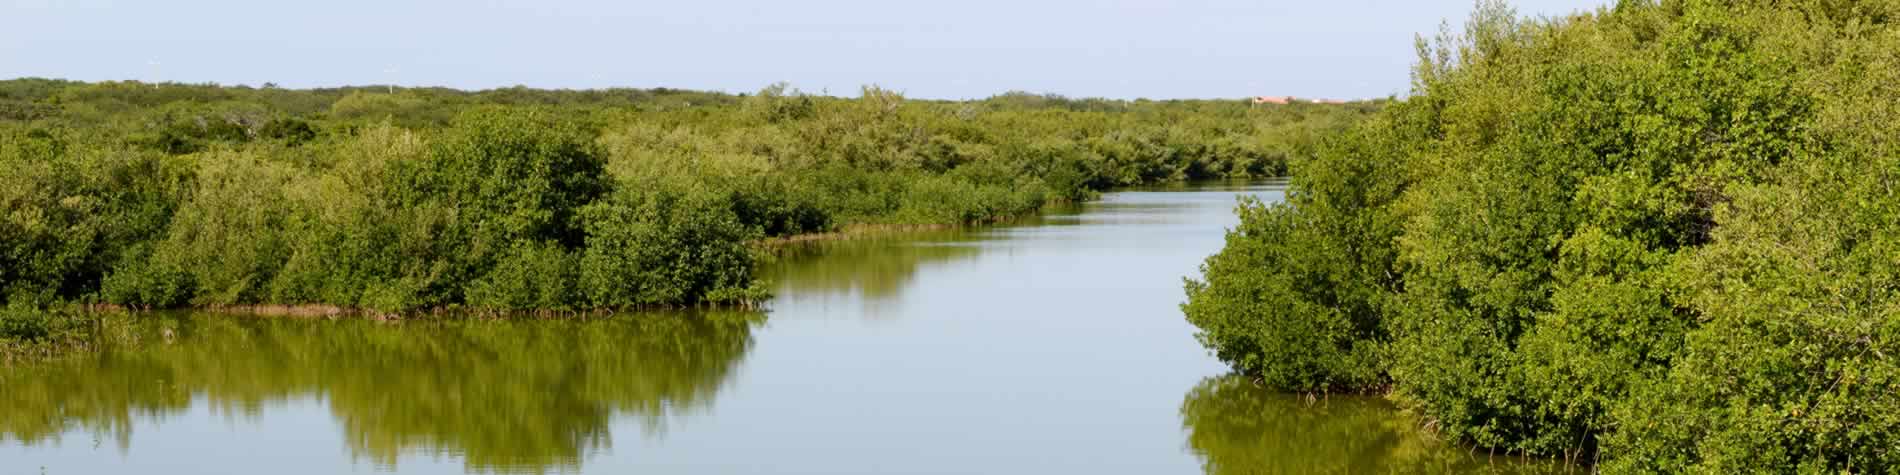 Landscape of mangroves in Cayo Coco